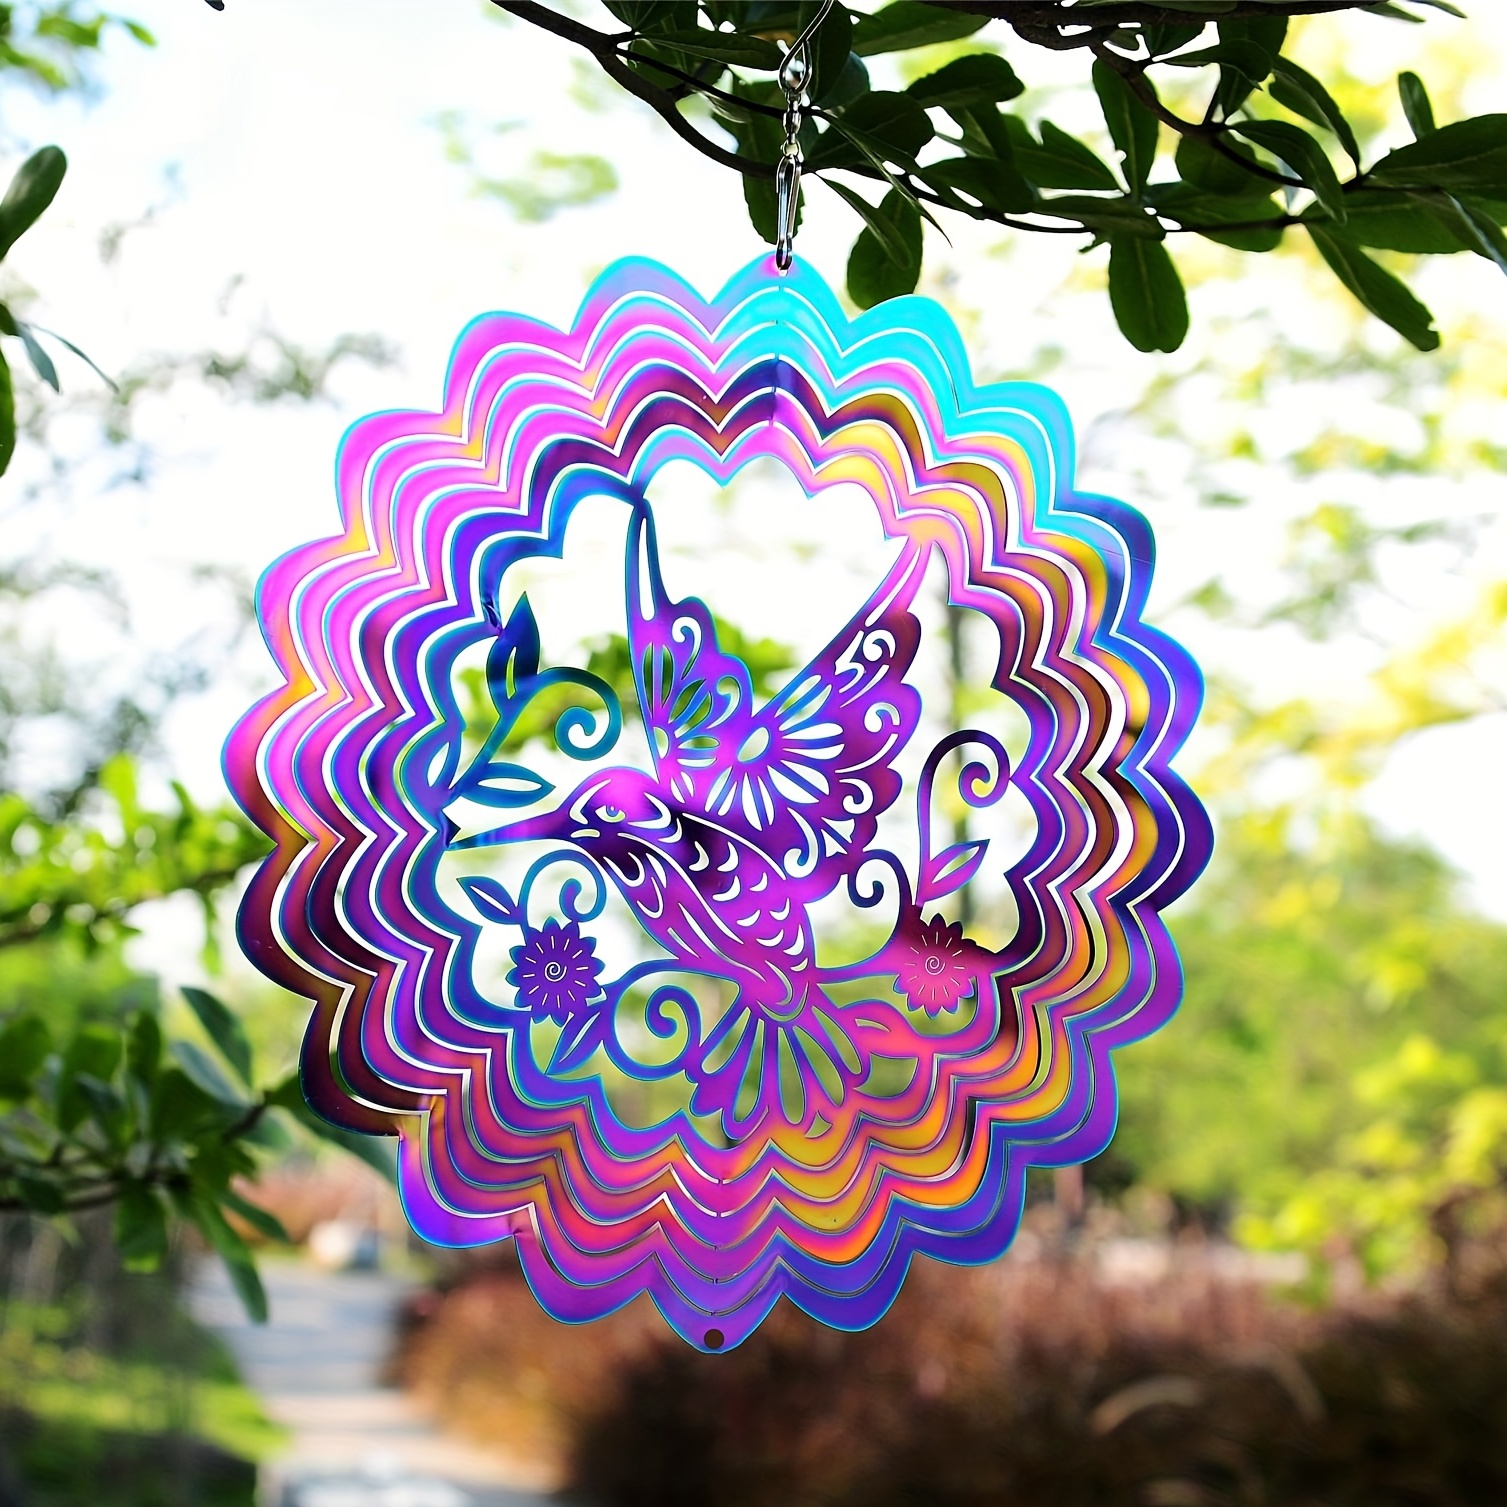 Hanging Spiral Wind Spinner with Solar Lights